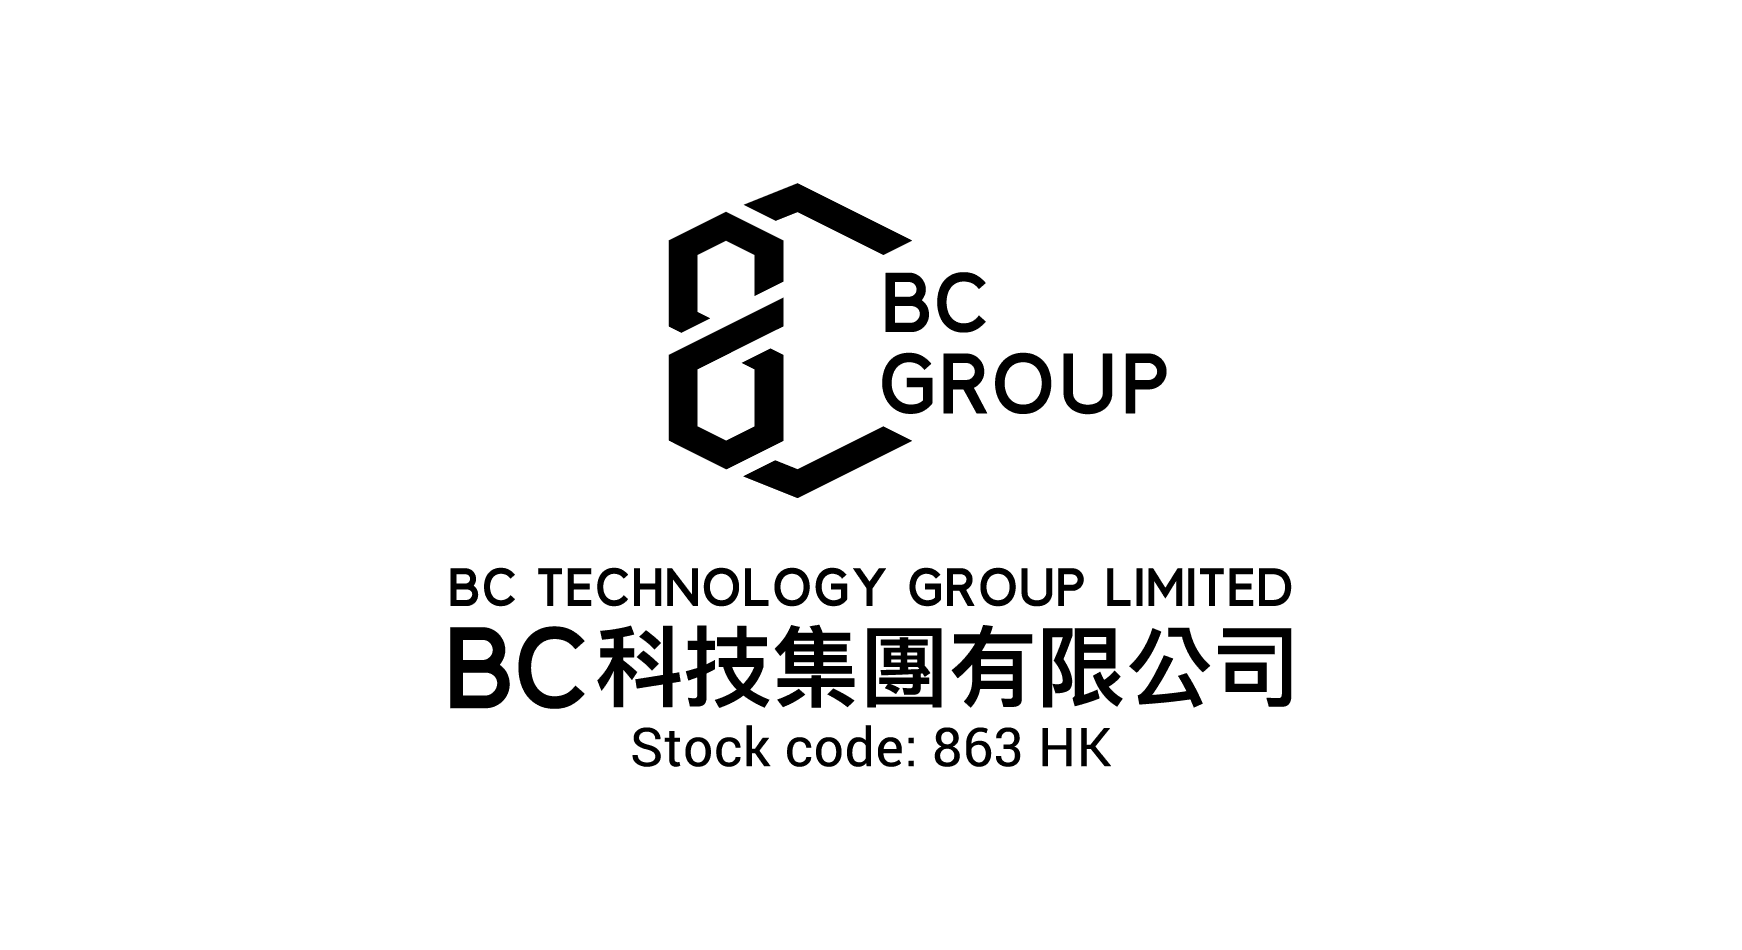 BC Group Logo Grayscale